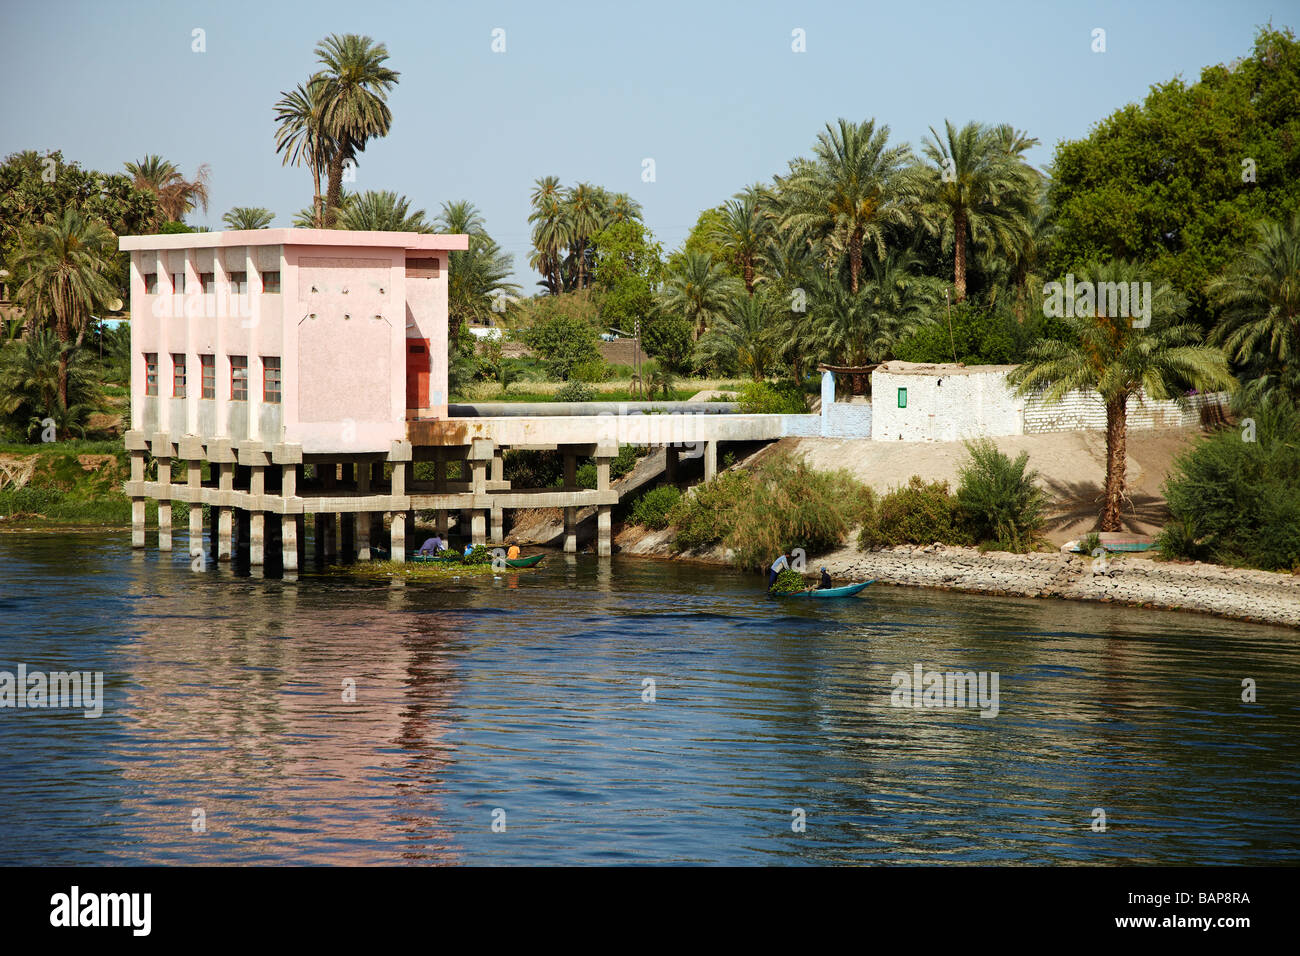 Water Pumping Station on the River Nile, Egypt Stock Photo